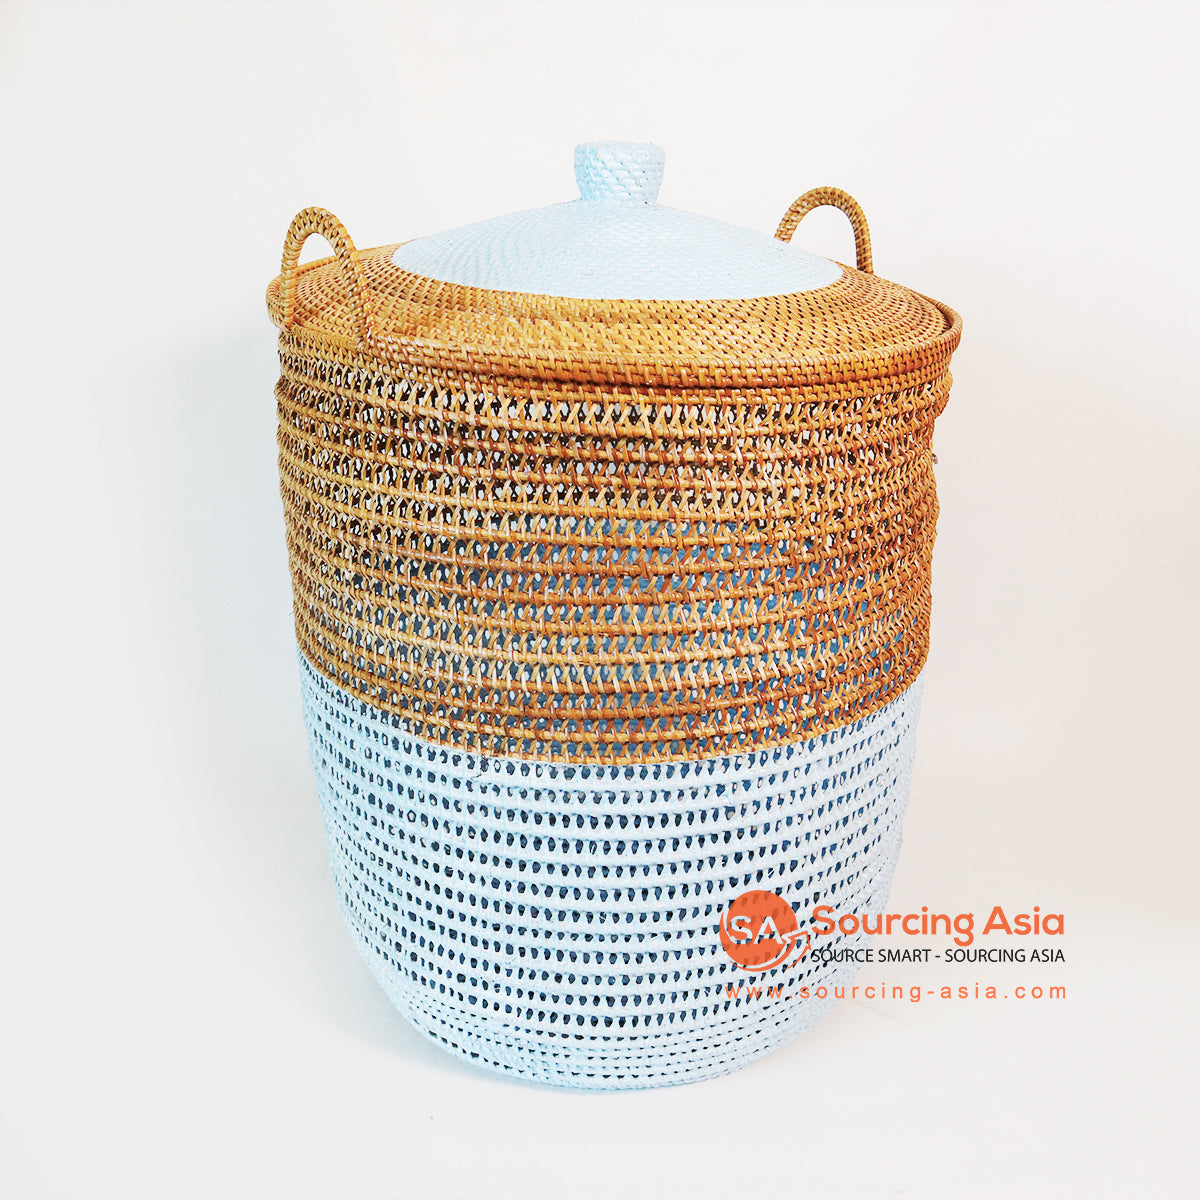 MTIC057 NATURAL AND BLUE WOVEN RATTAN BASKET WITH LID AND HANDLE